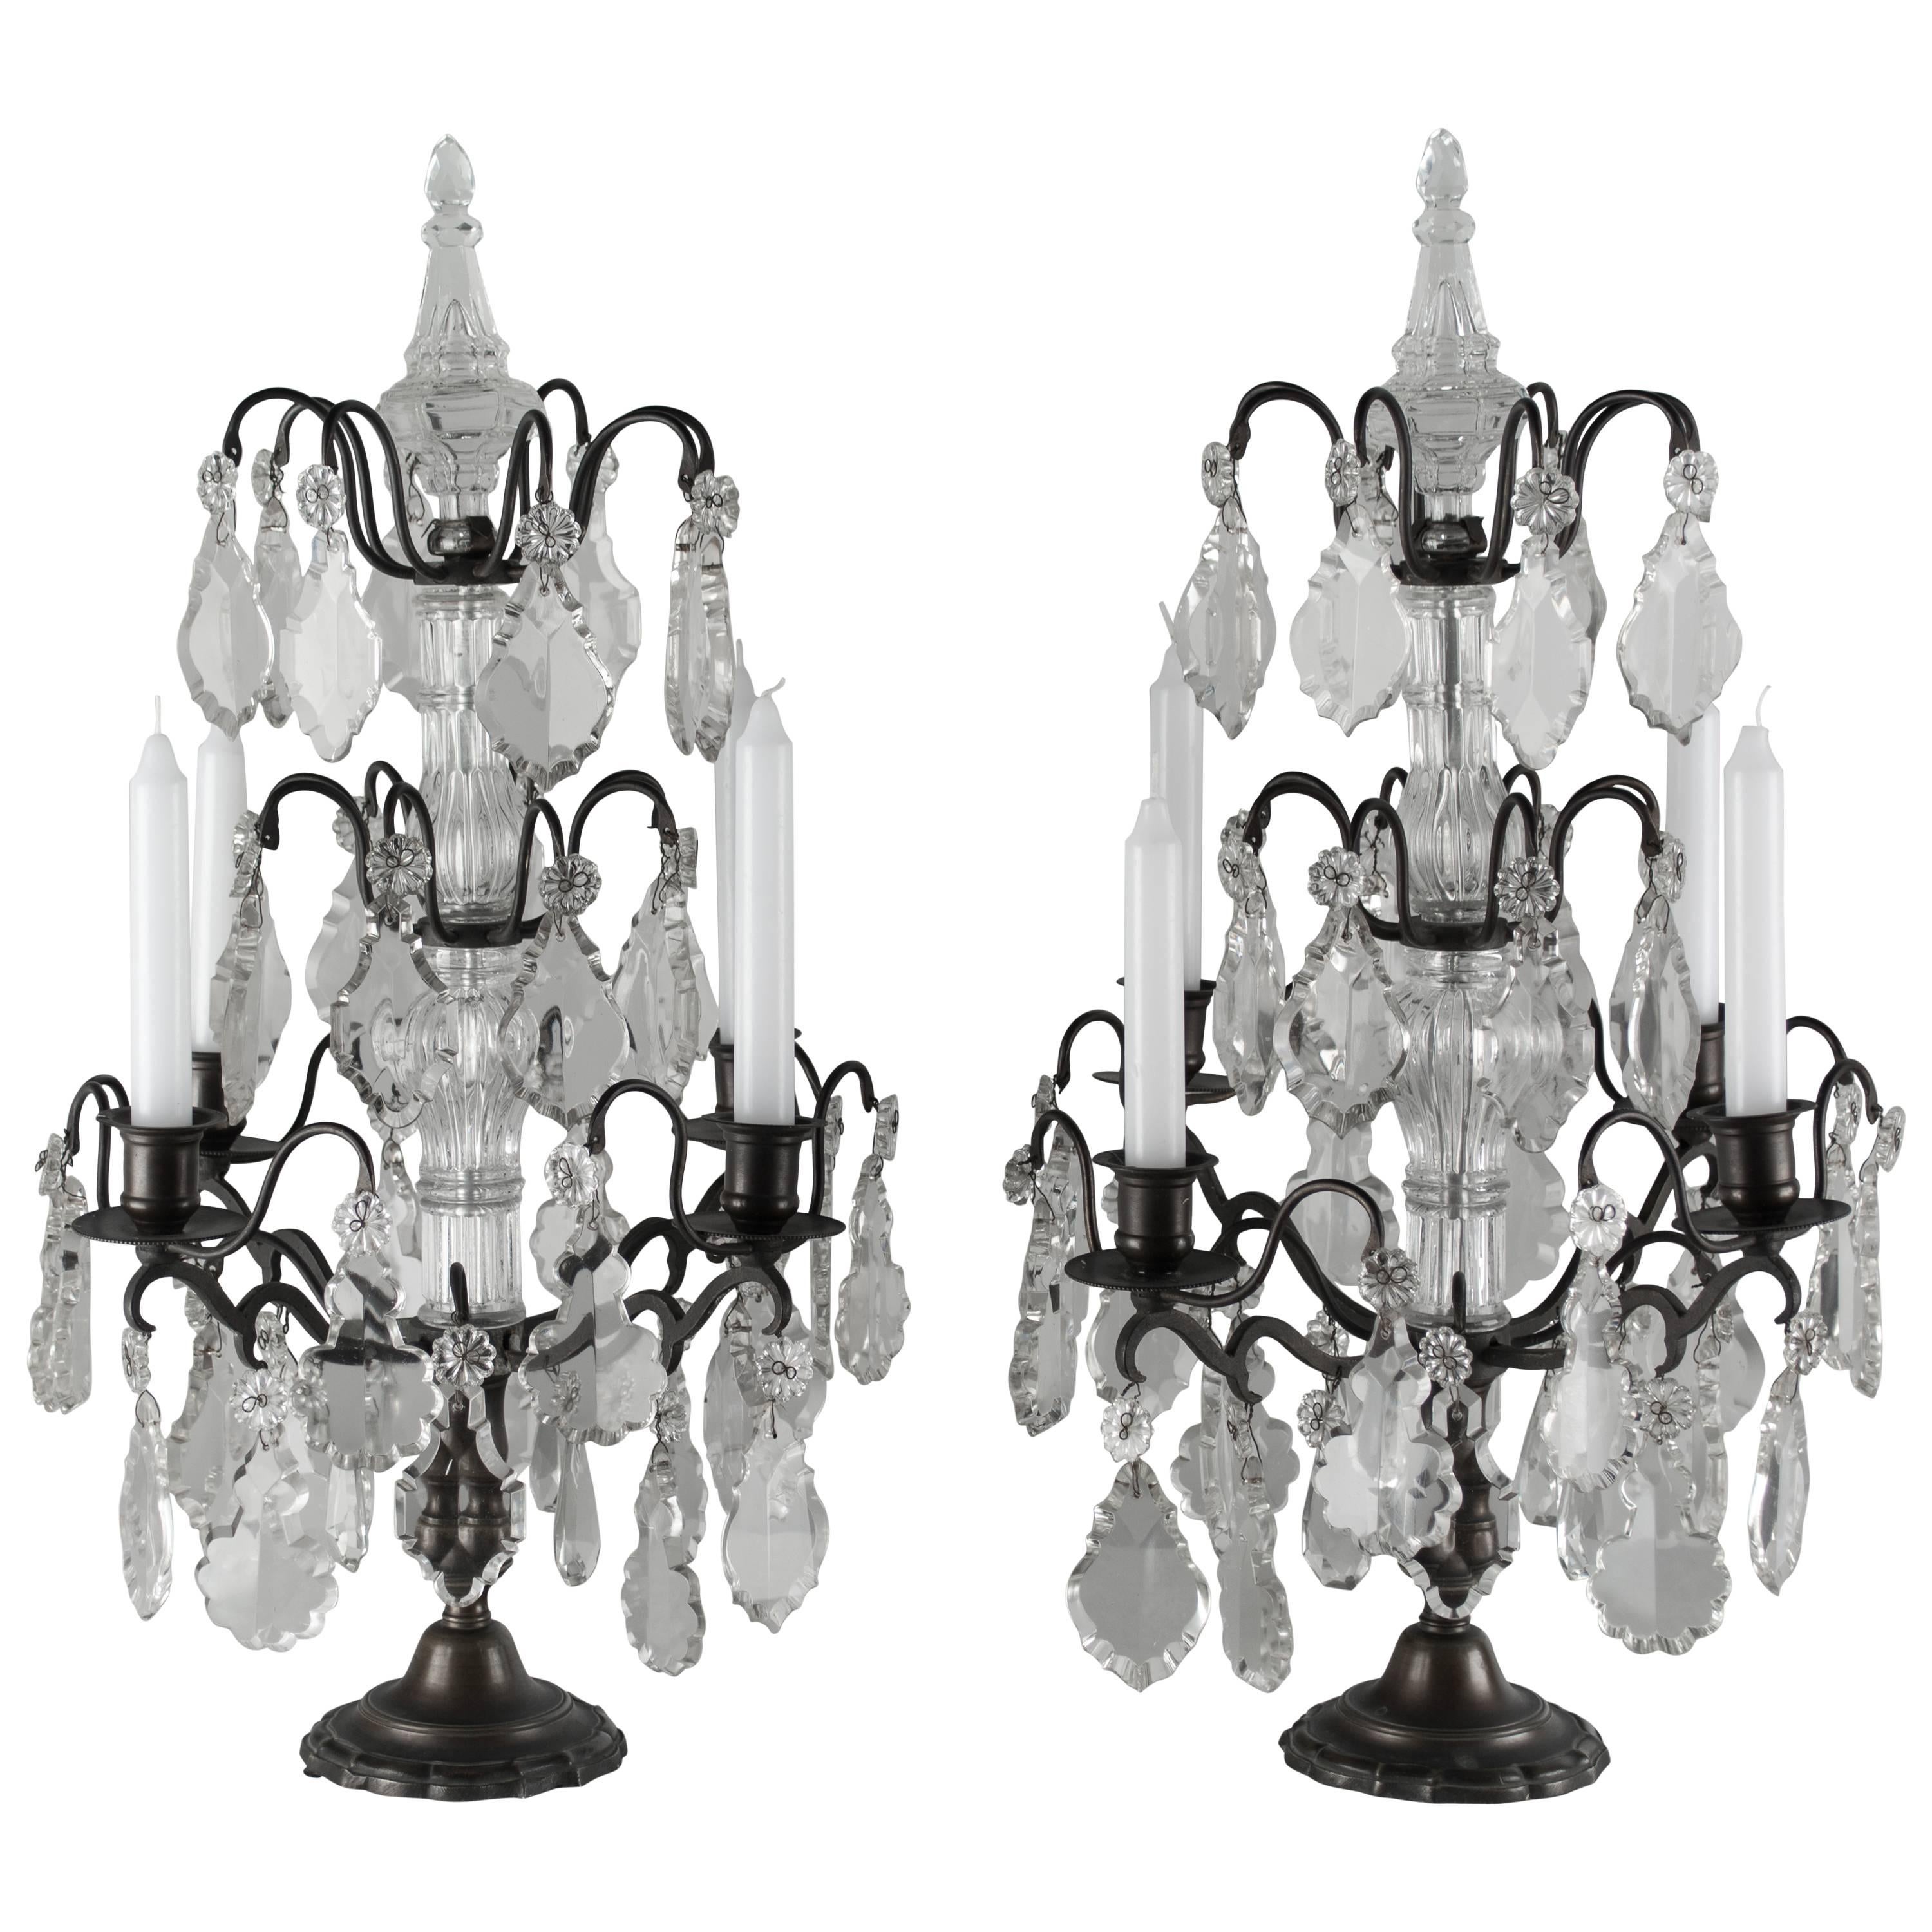 Pair of French Girandoles or Table lights